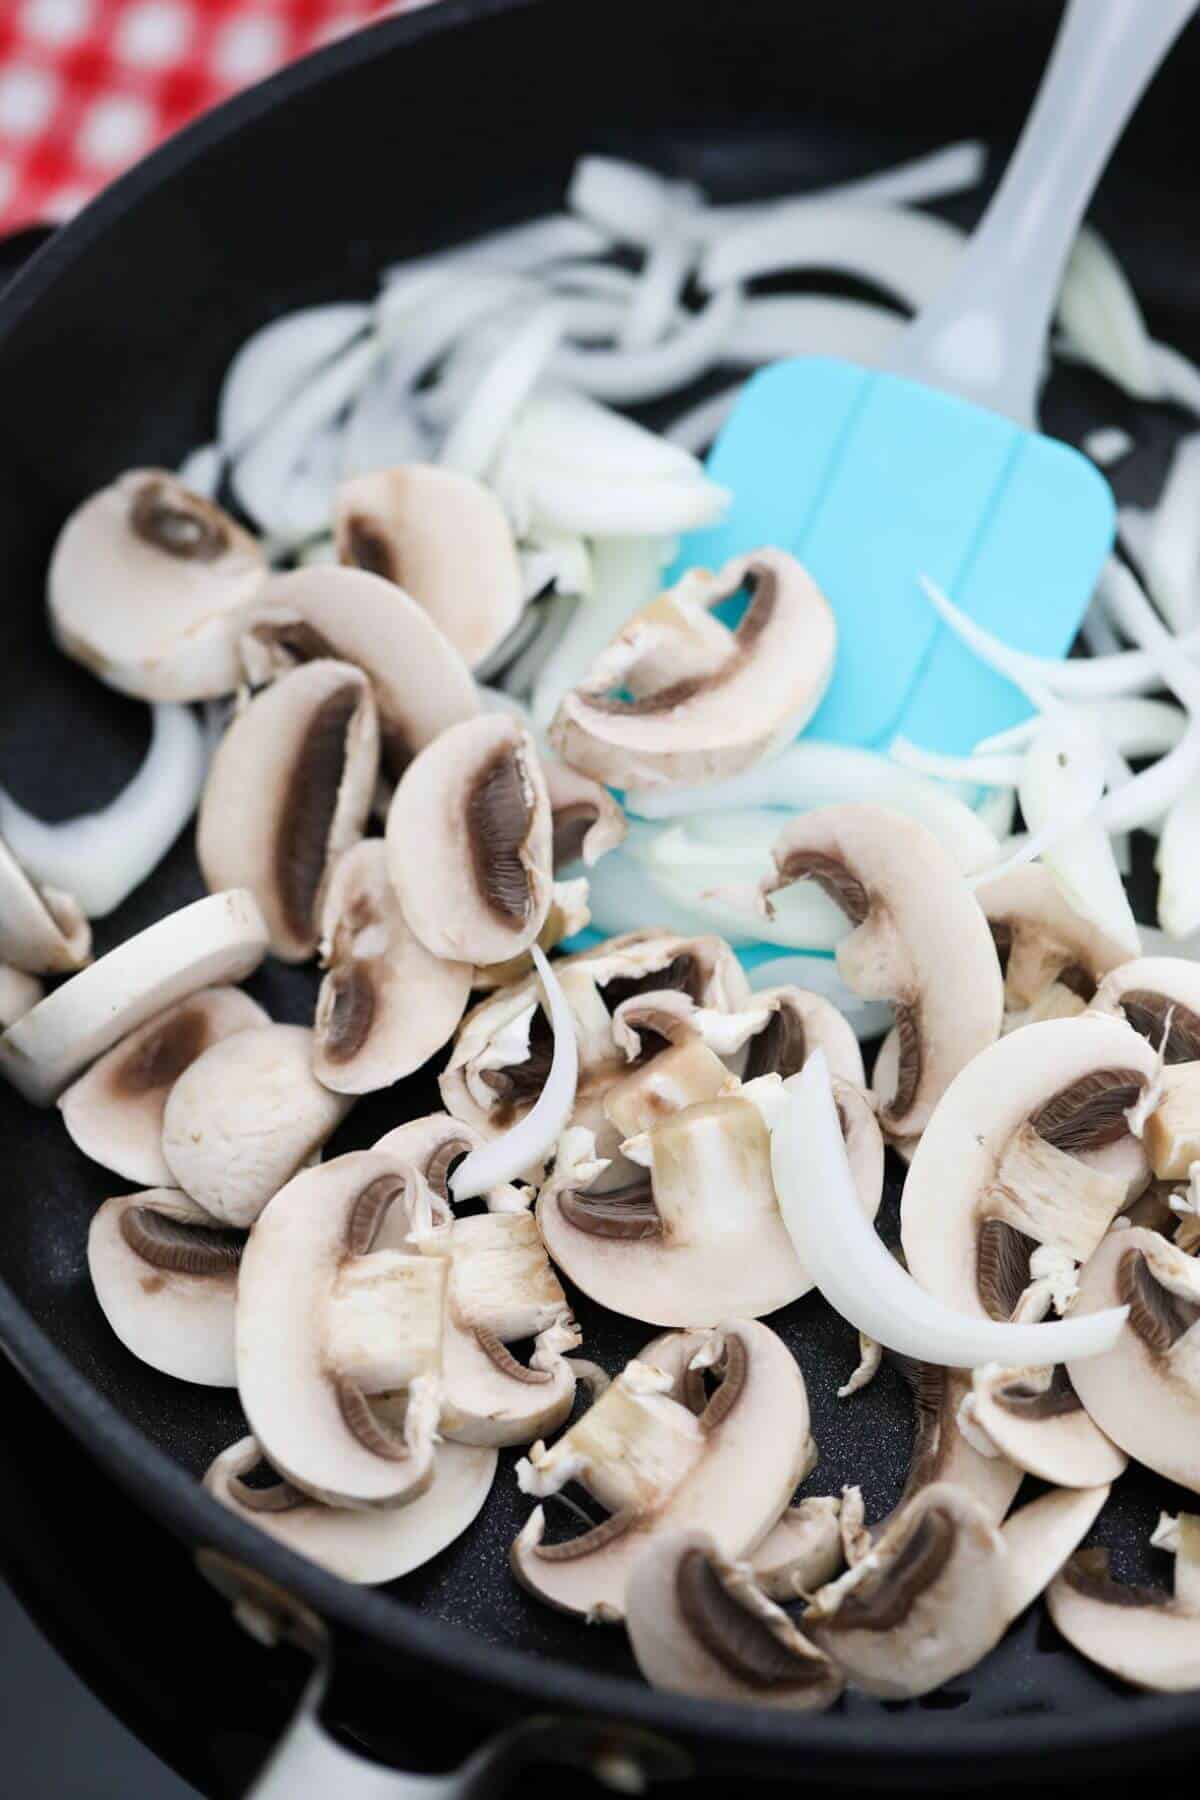 Mushrooms and onions in a pan with a blue spatula.